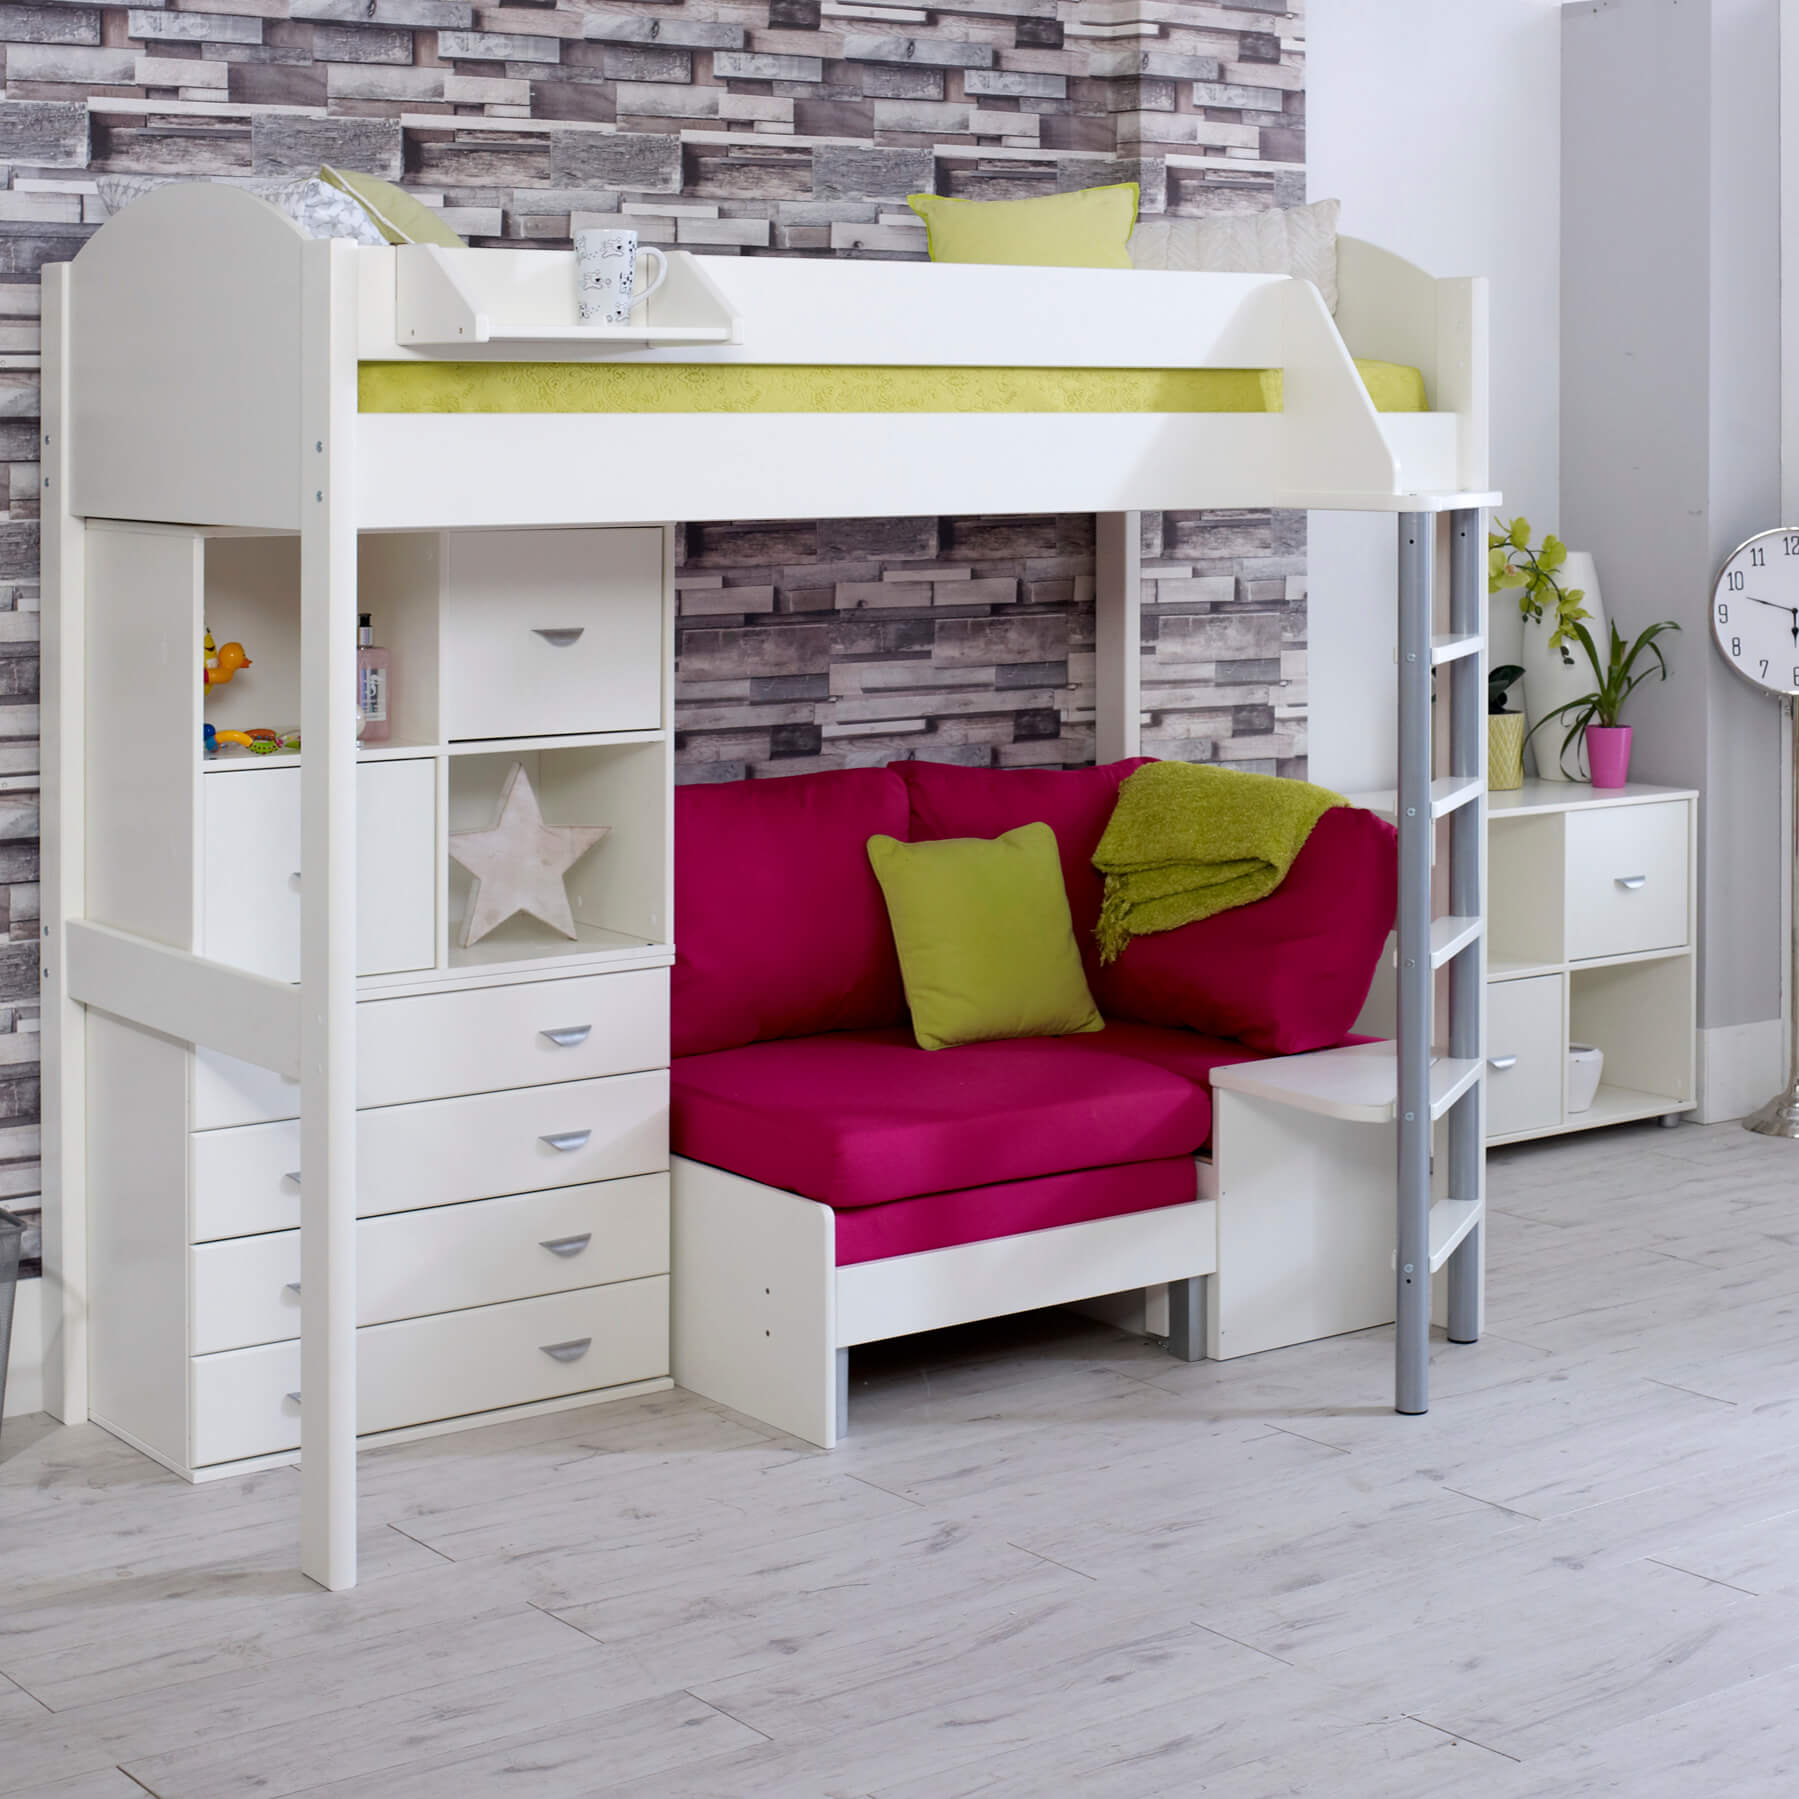 Layla High Sleeper Bed In White With Fuchsia Sofa Chair Bed